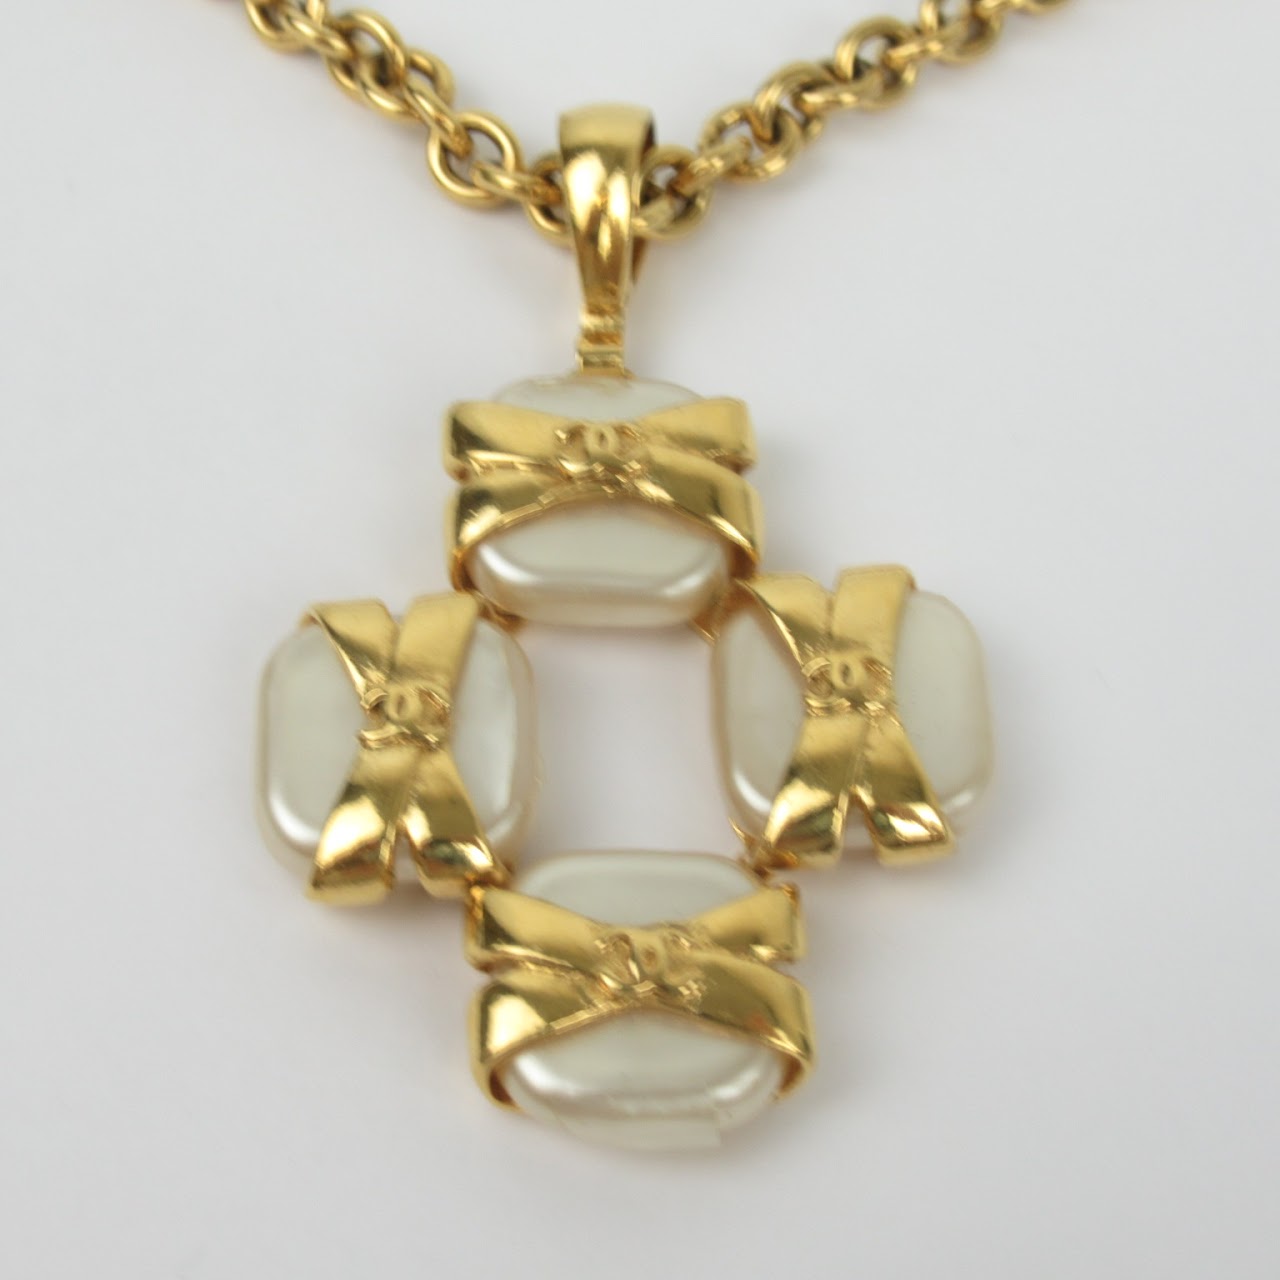 Chanel Bow Pendant Necklace